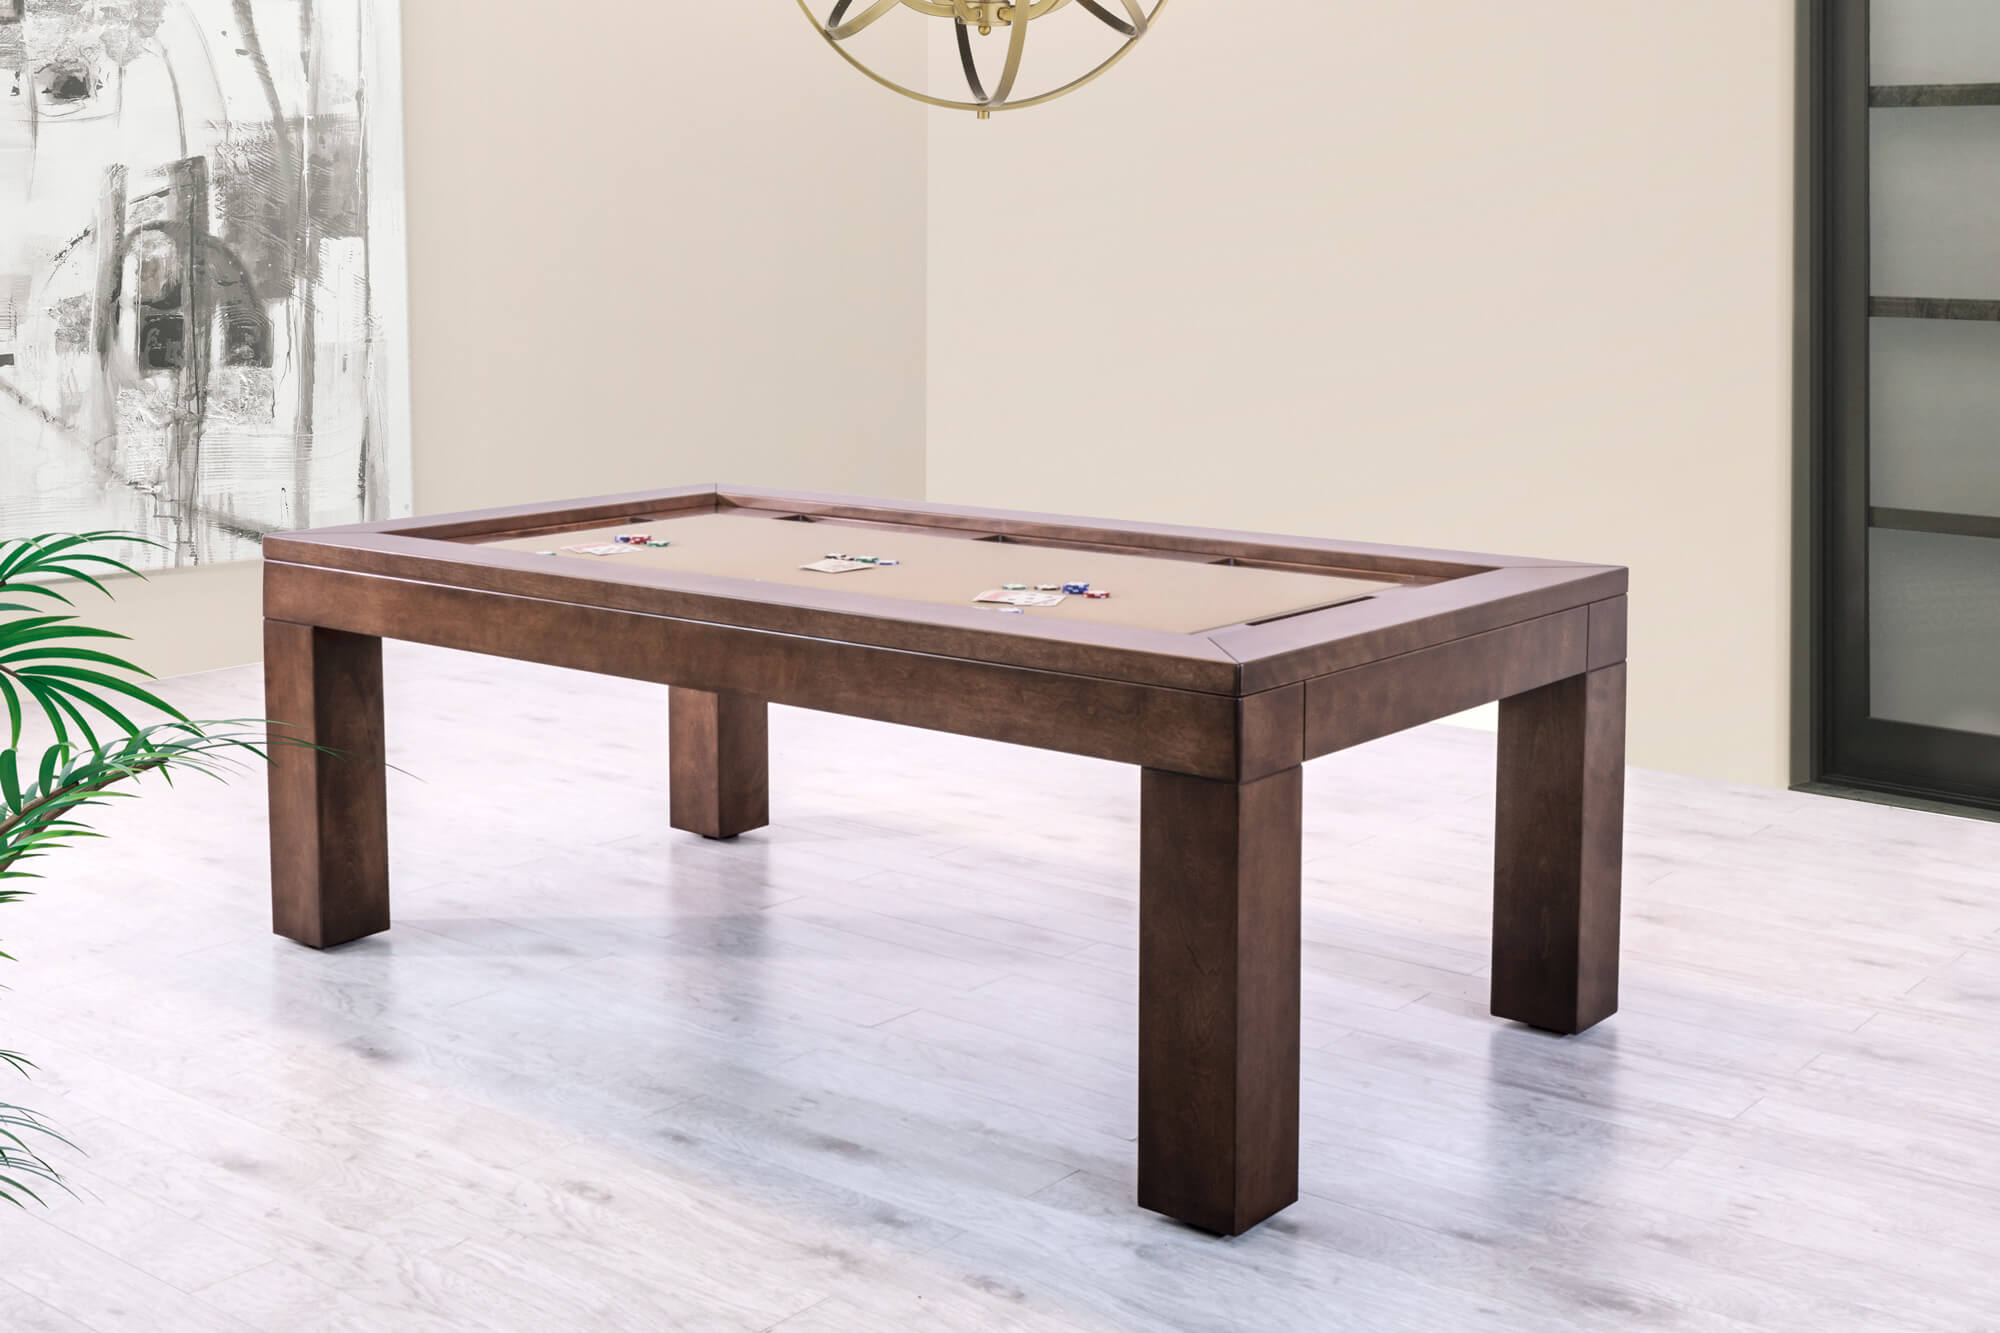 DREAM GAME TABLE